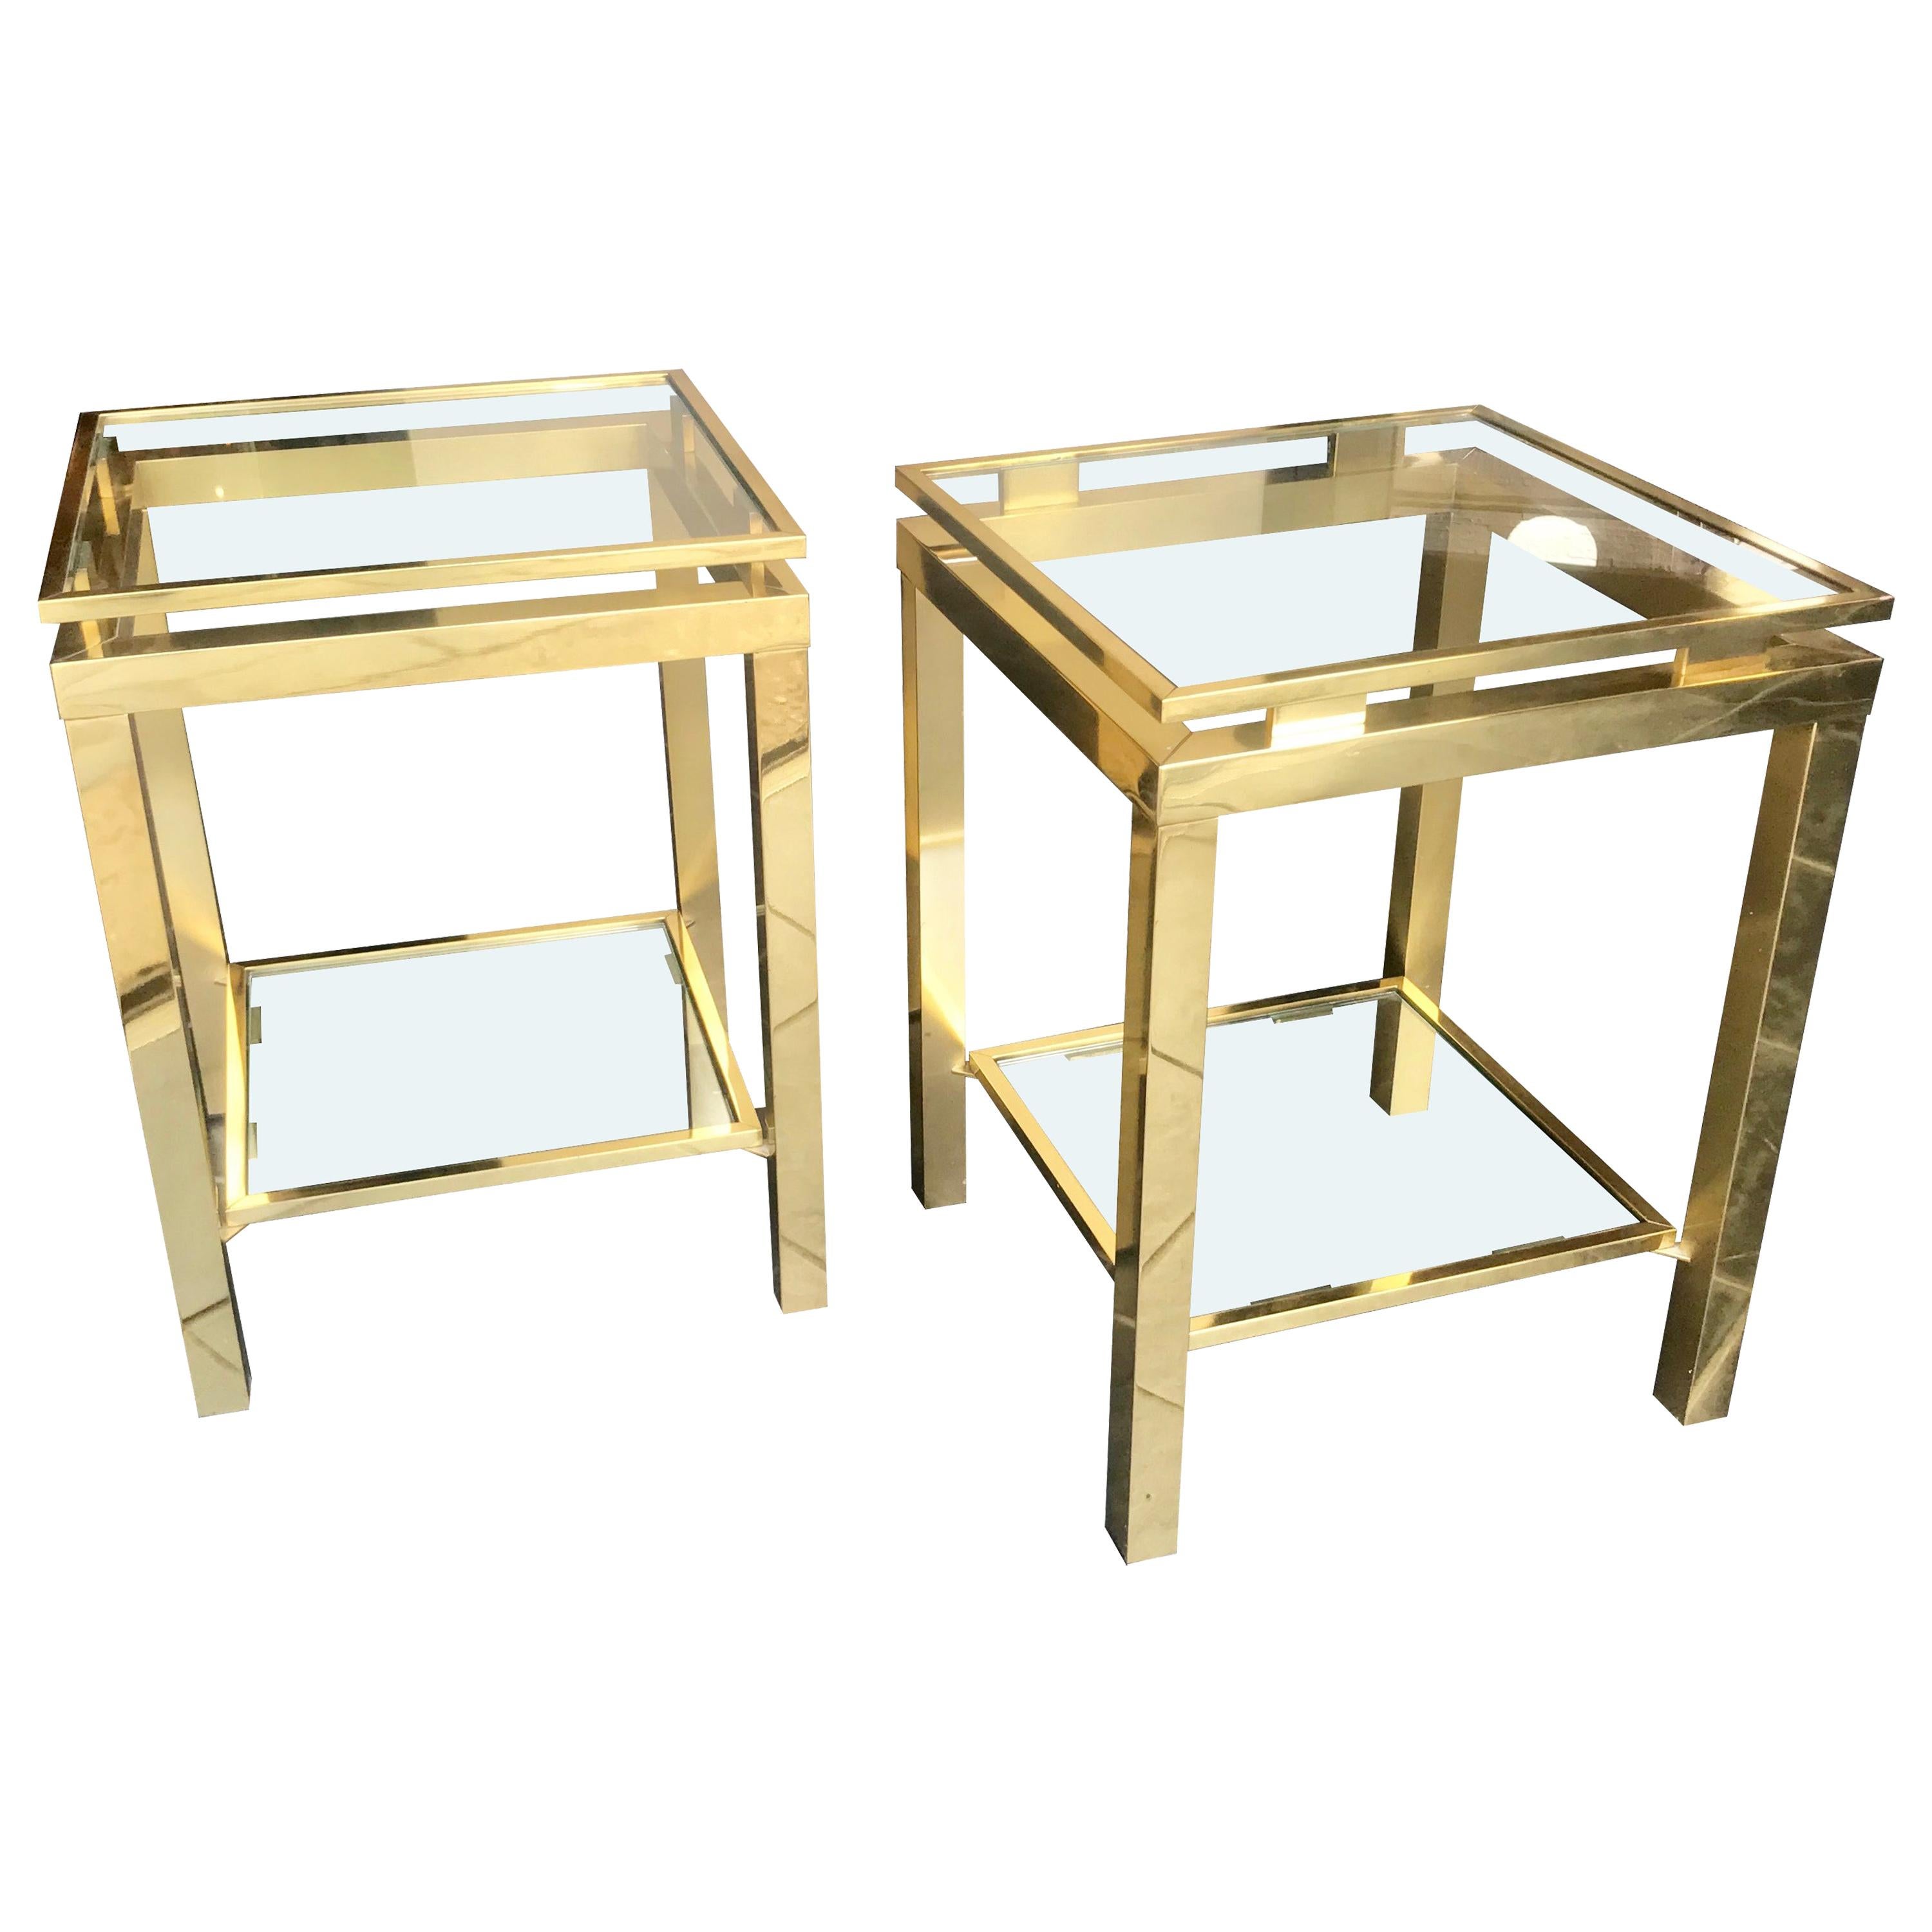 Pair of Guy Lefevre Style Polished Gilt Metal Side Tables with 2 Glass Shelves